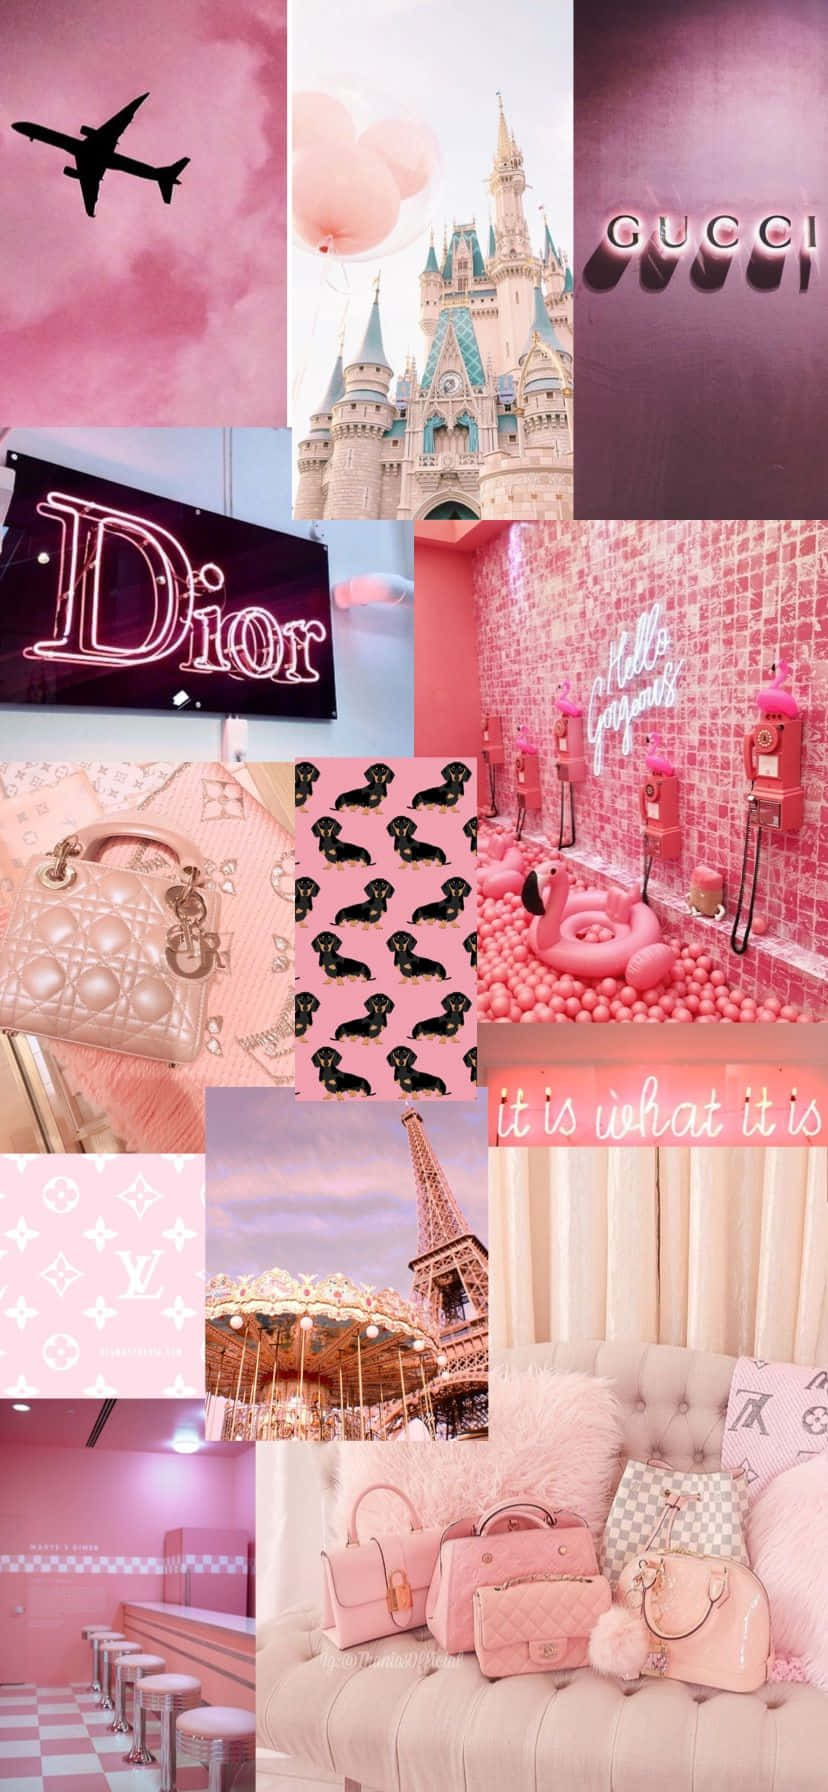 Aesthetic background of pink with different photos - Design